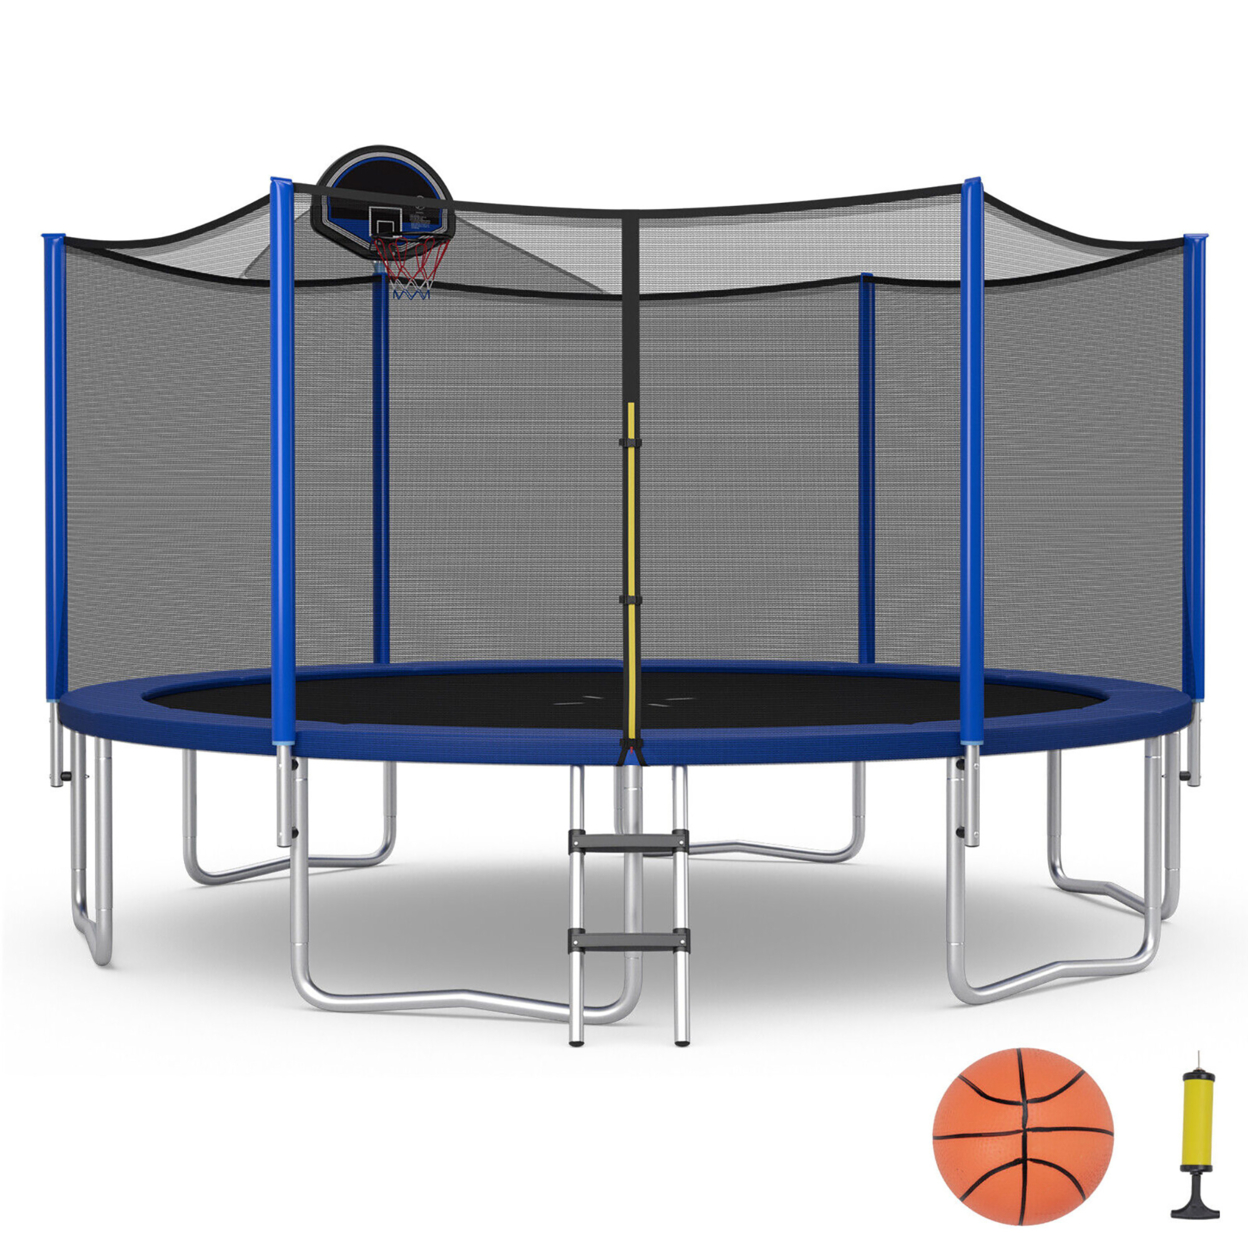 14FT Outdoor Large Trampoline Safety Enclosure Net W/ Basketball